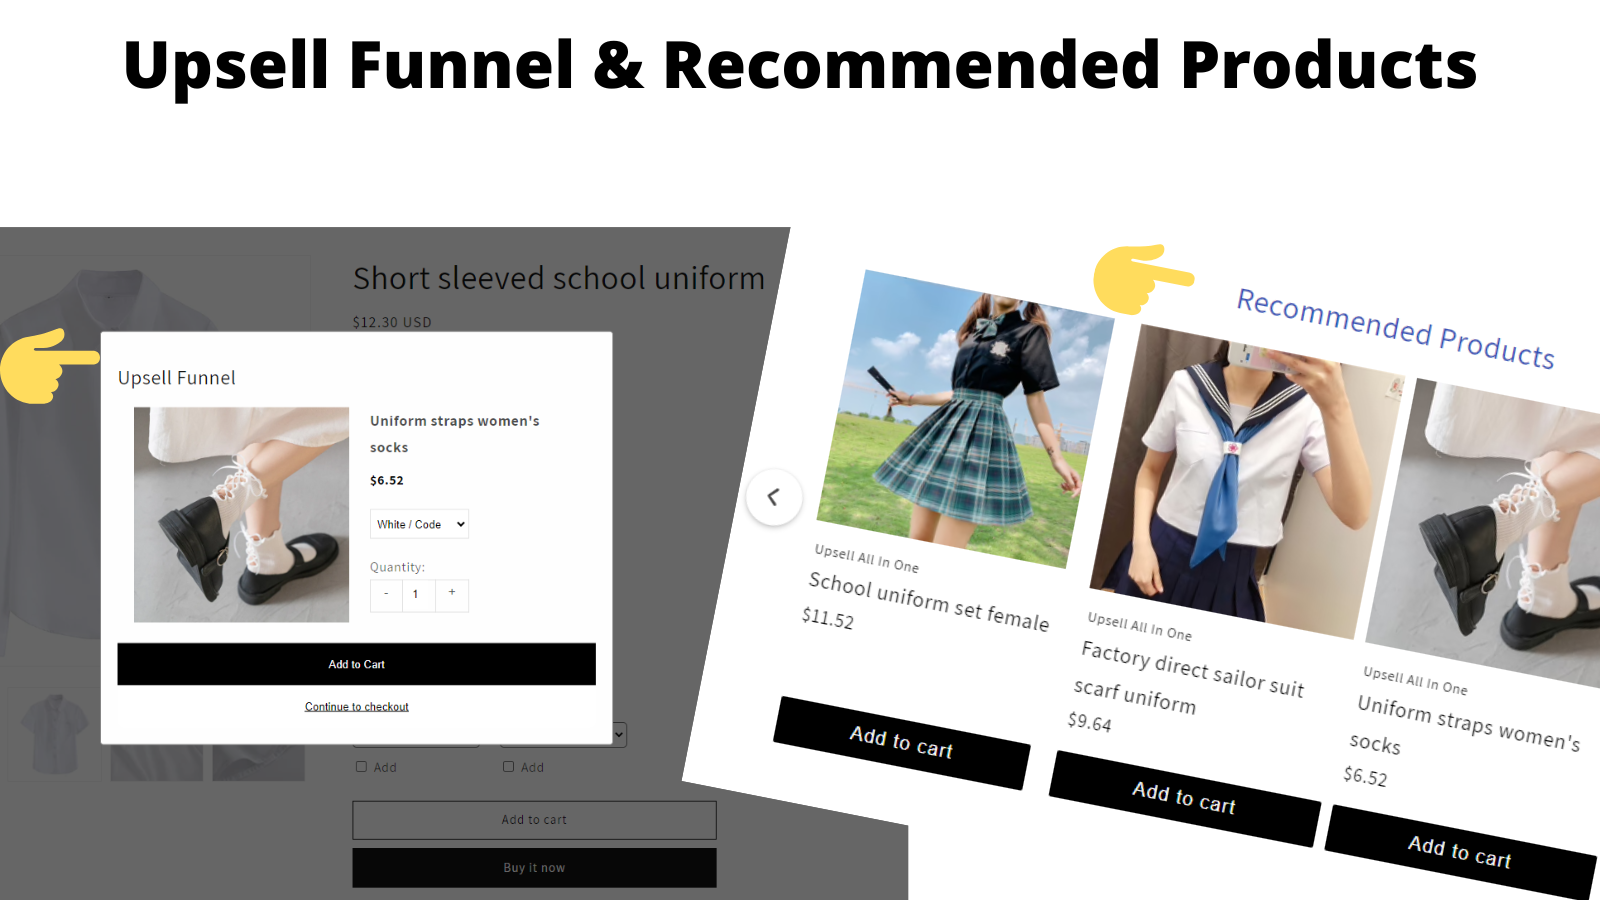 Upsell Funnel & Recommended Products